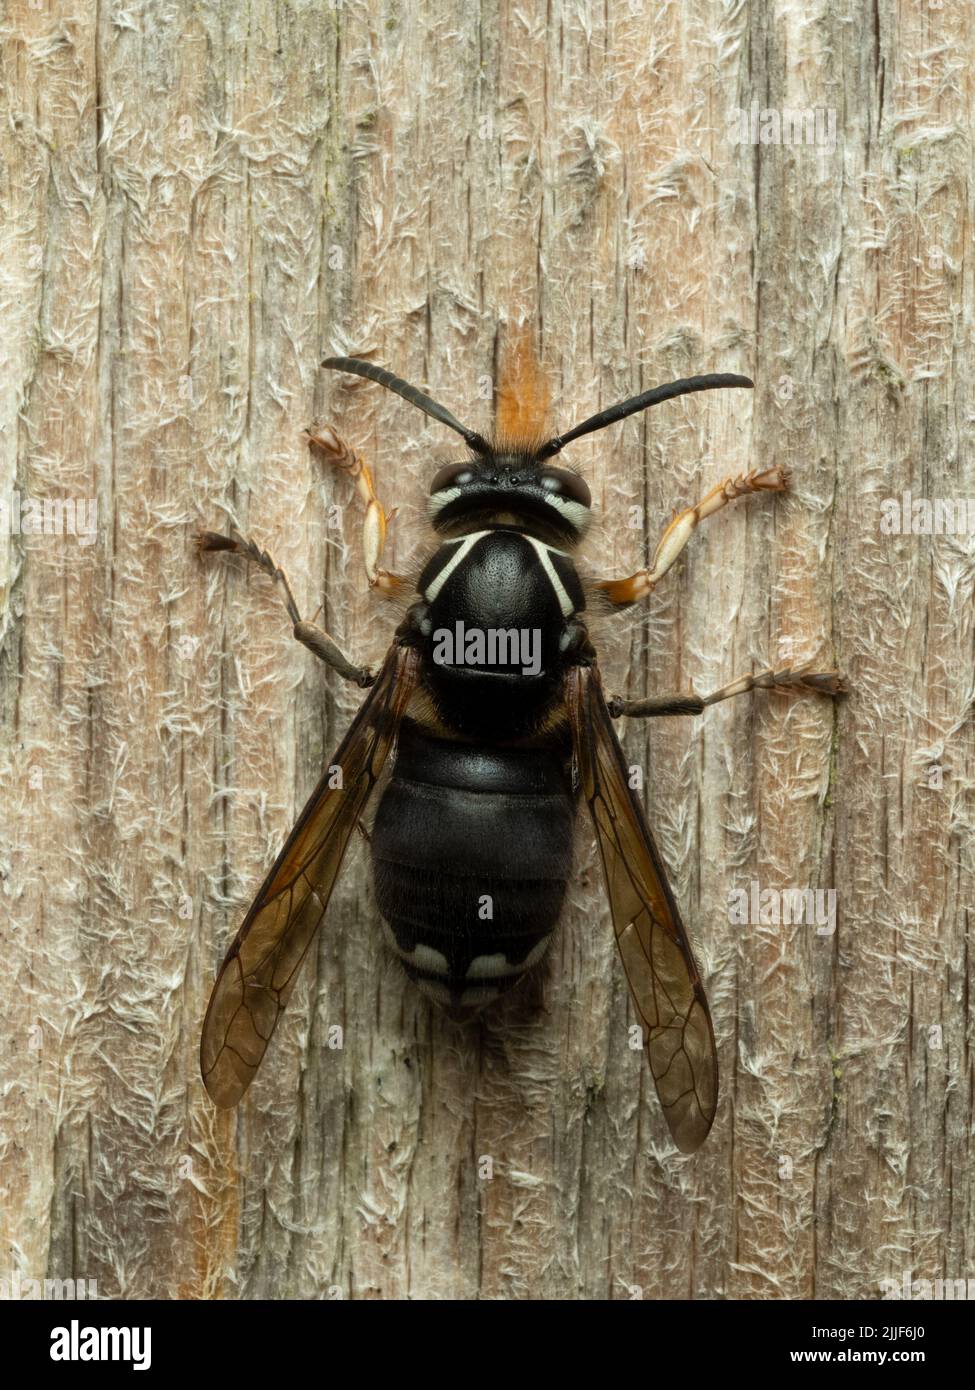 dorsal view of a bald faced hornet, Dolichovespula maculata, chewing wood from an old fence board Stock Photo